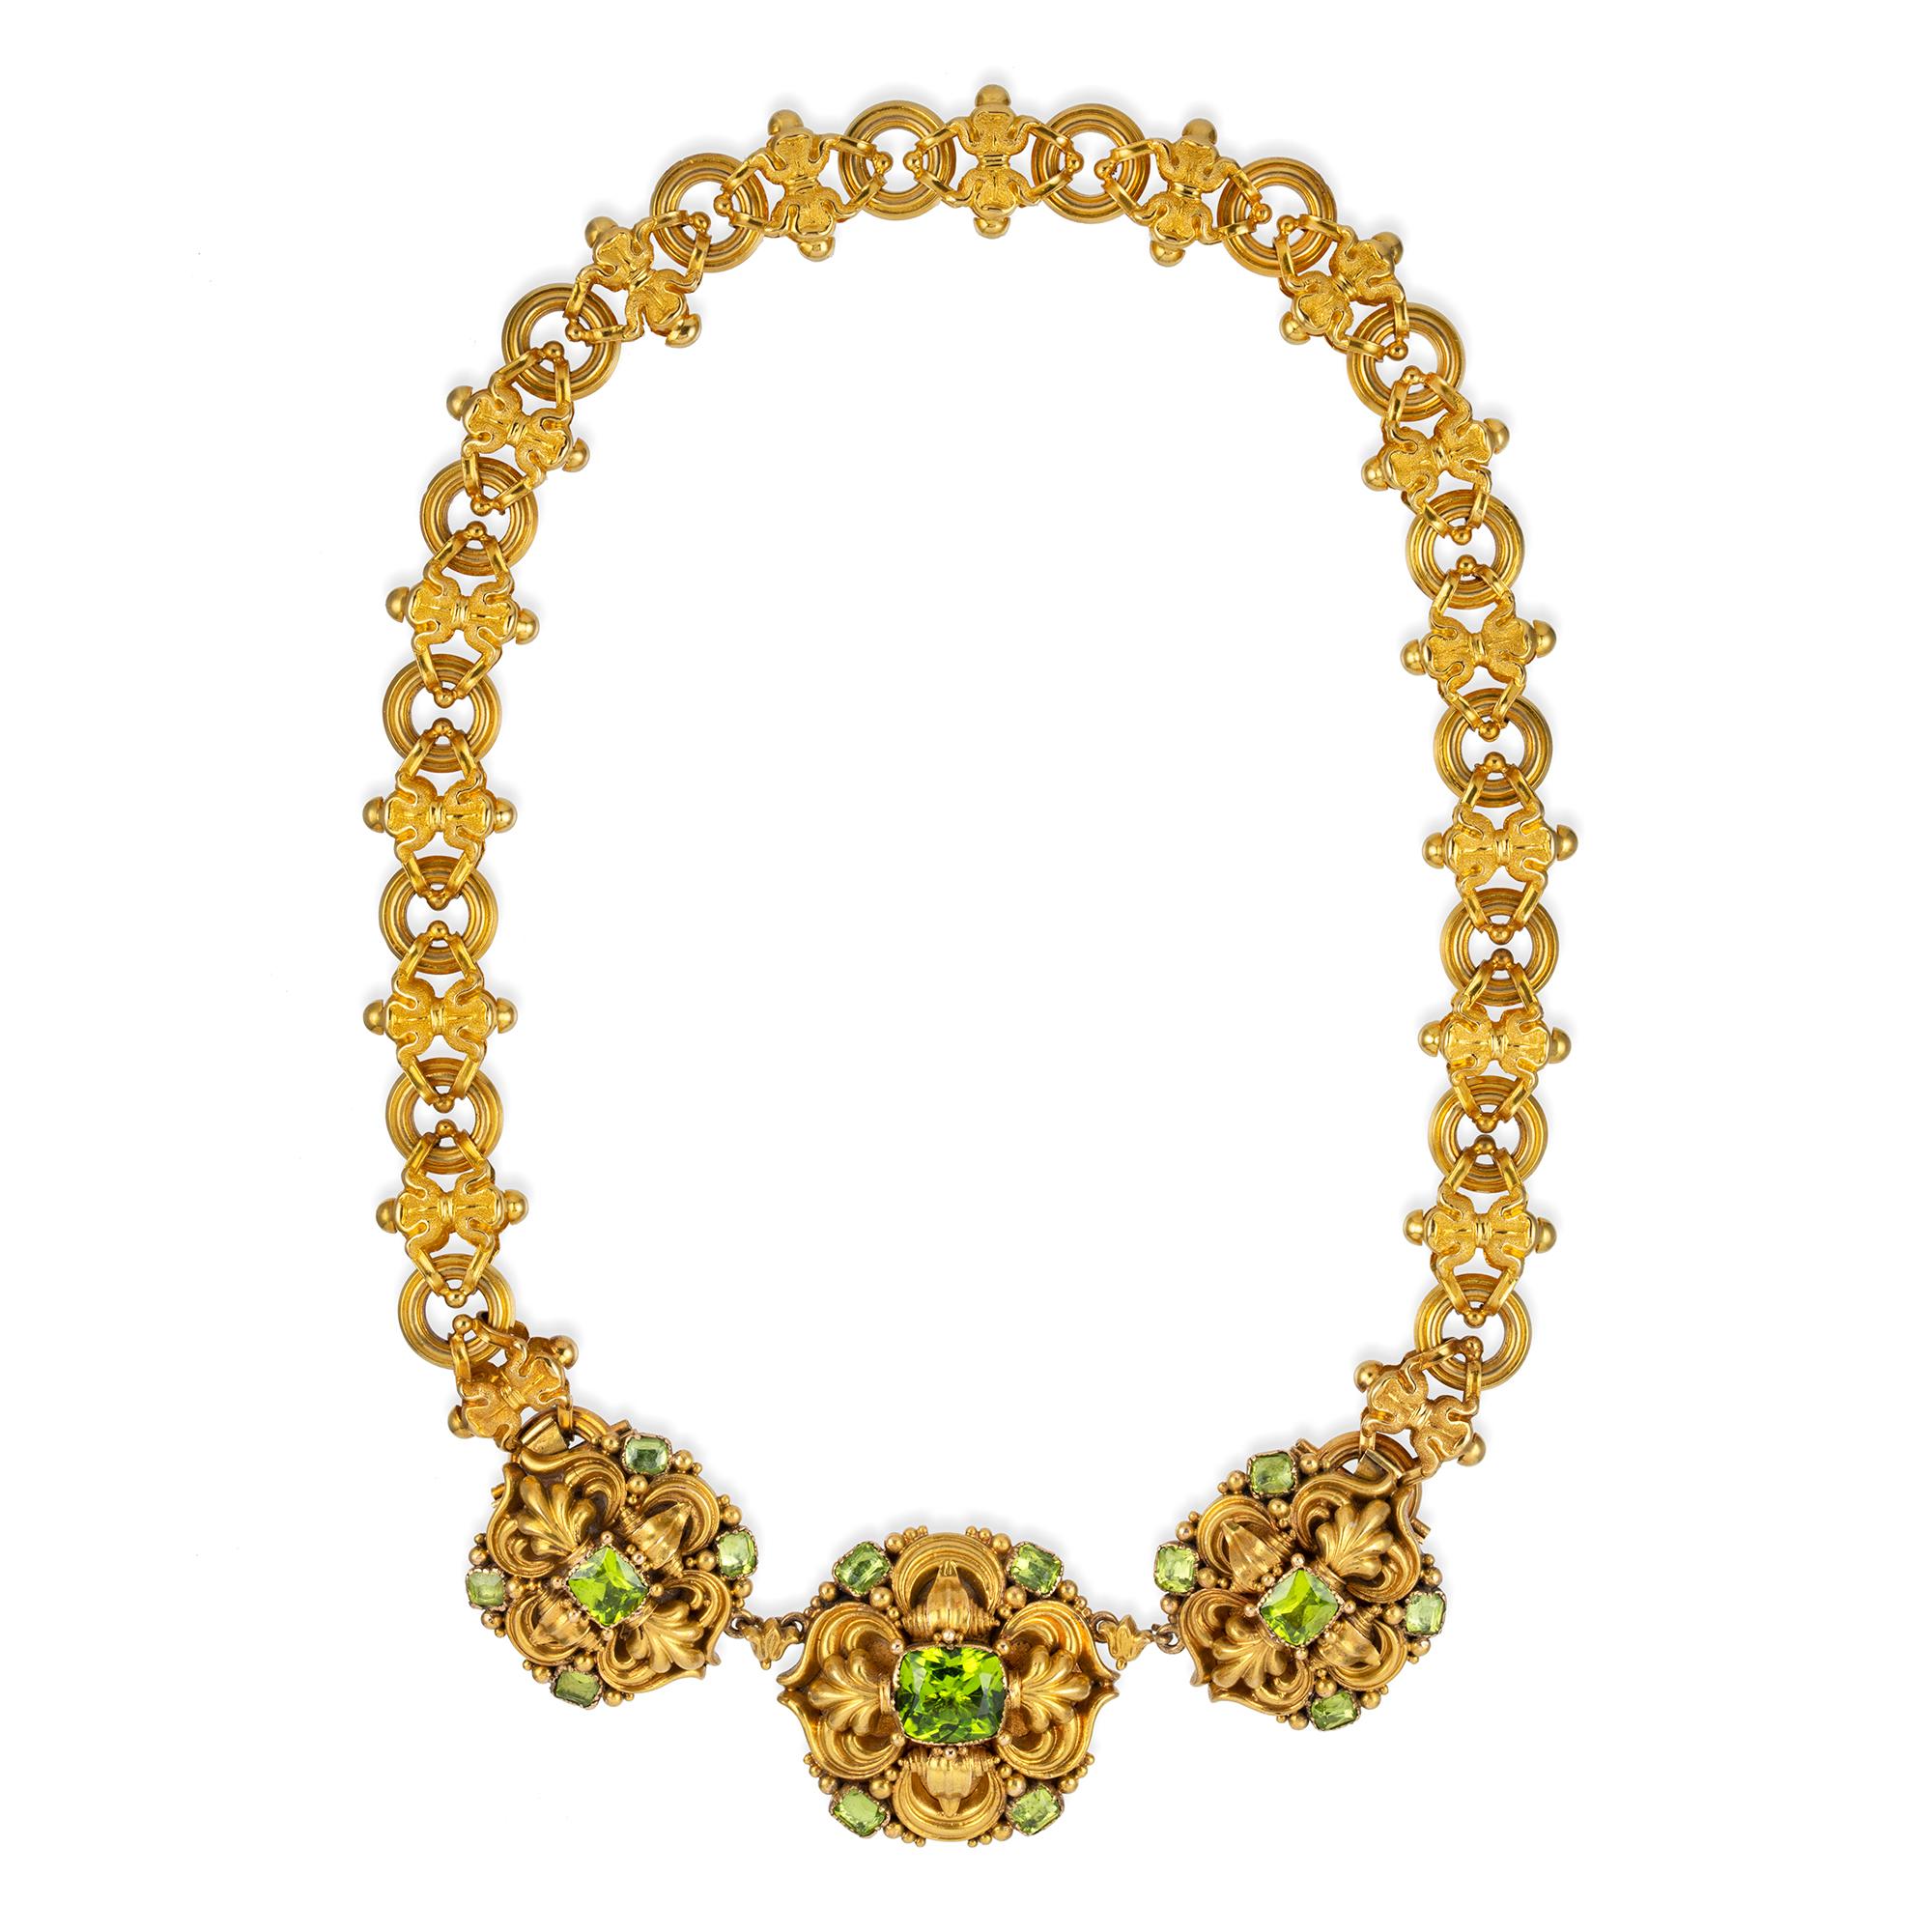 An early Victorian peridot and gold parure in the Knight pattern, the necklace consisting of three plaques each set with five cushion shape faceted peridots set in a stamped gold eclectic design surround, attached to a chain consisting of sixteen